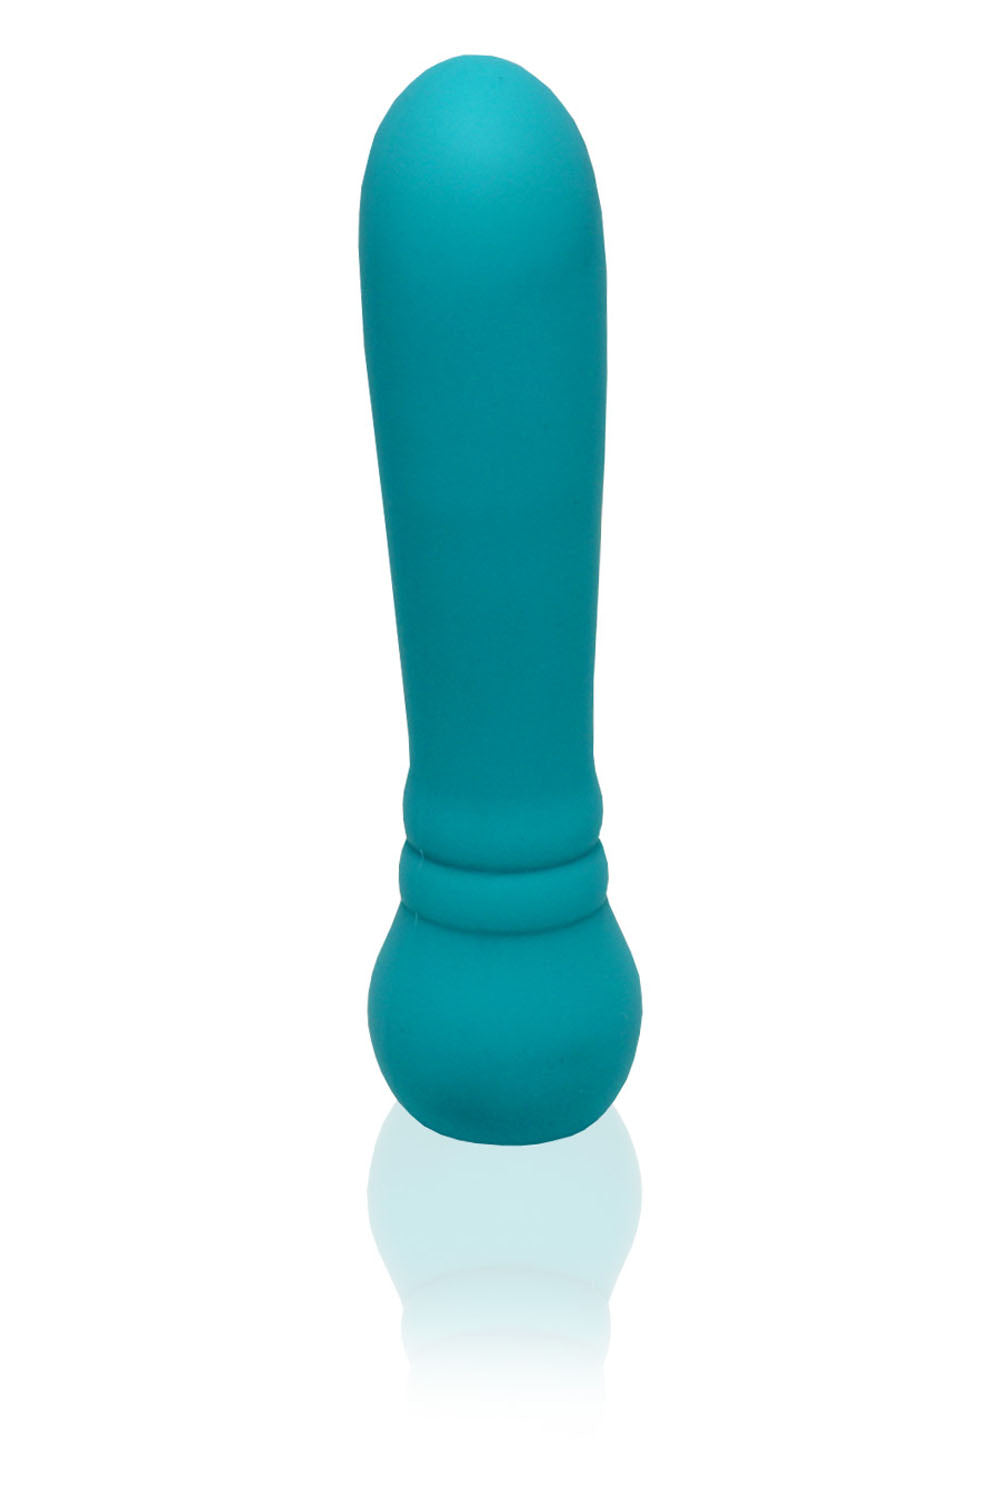 Ultra Bullet - Turquoise FF-1008-04